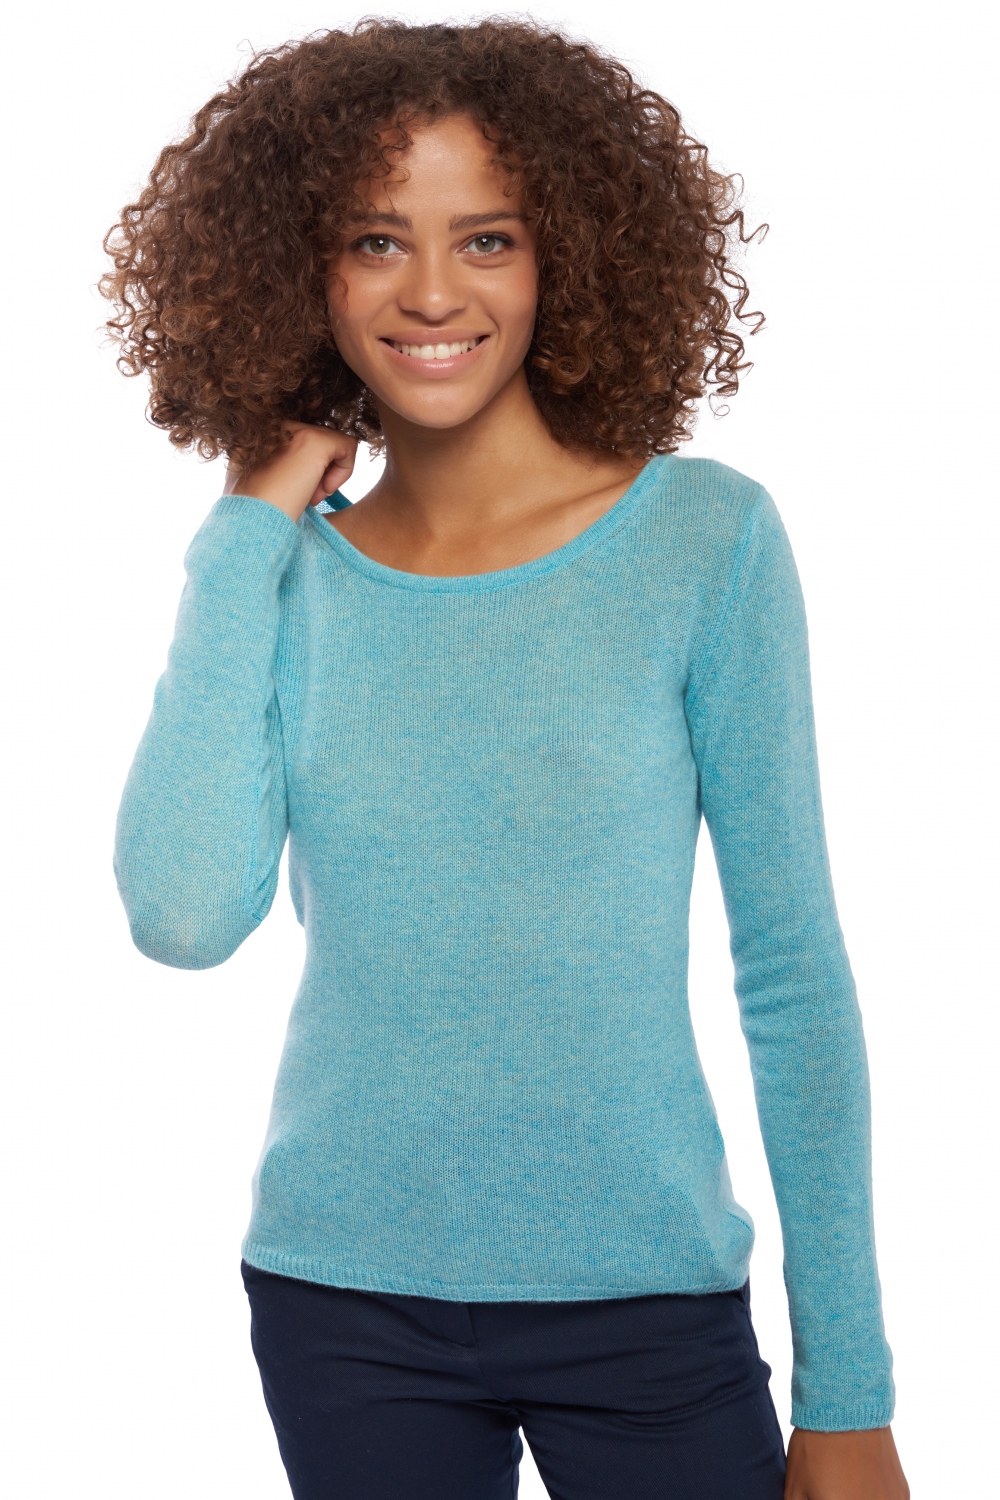 Cashmere ladies basic sweaters at low prices caleen piscine 3xl